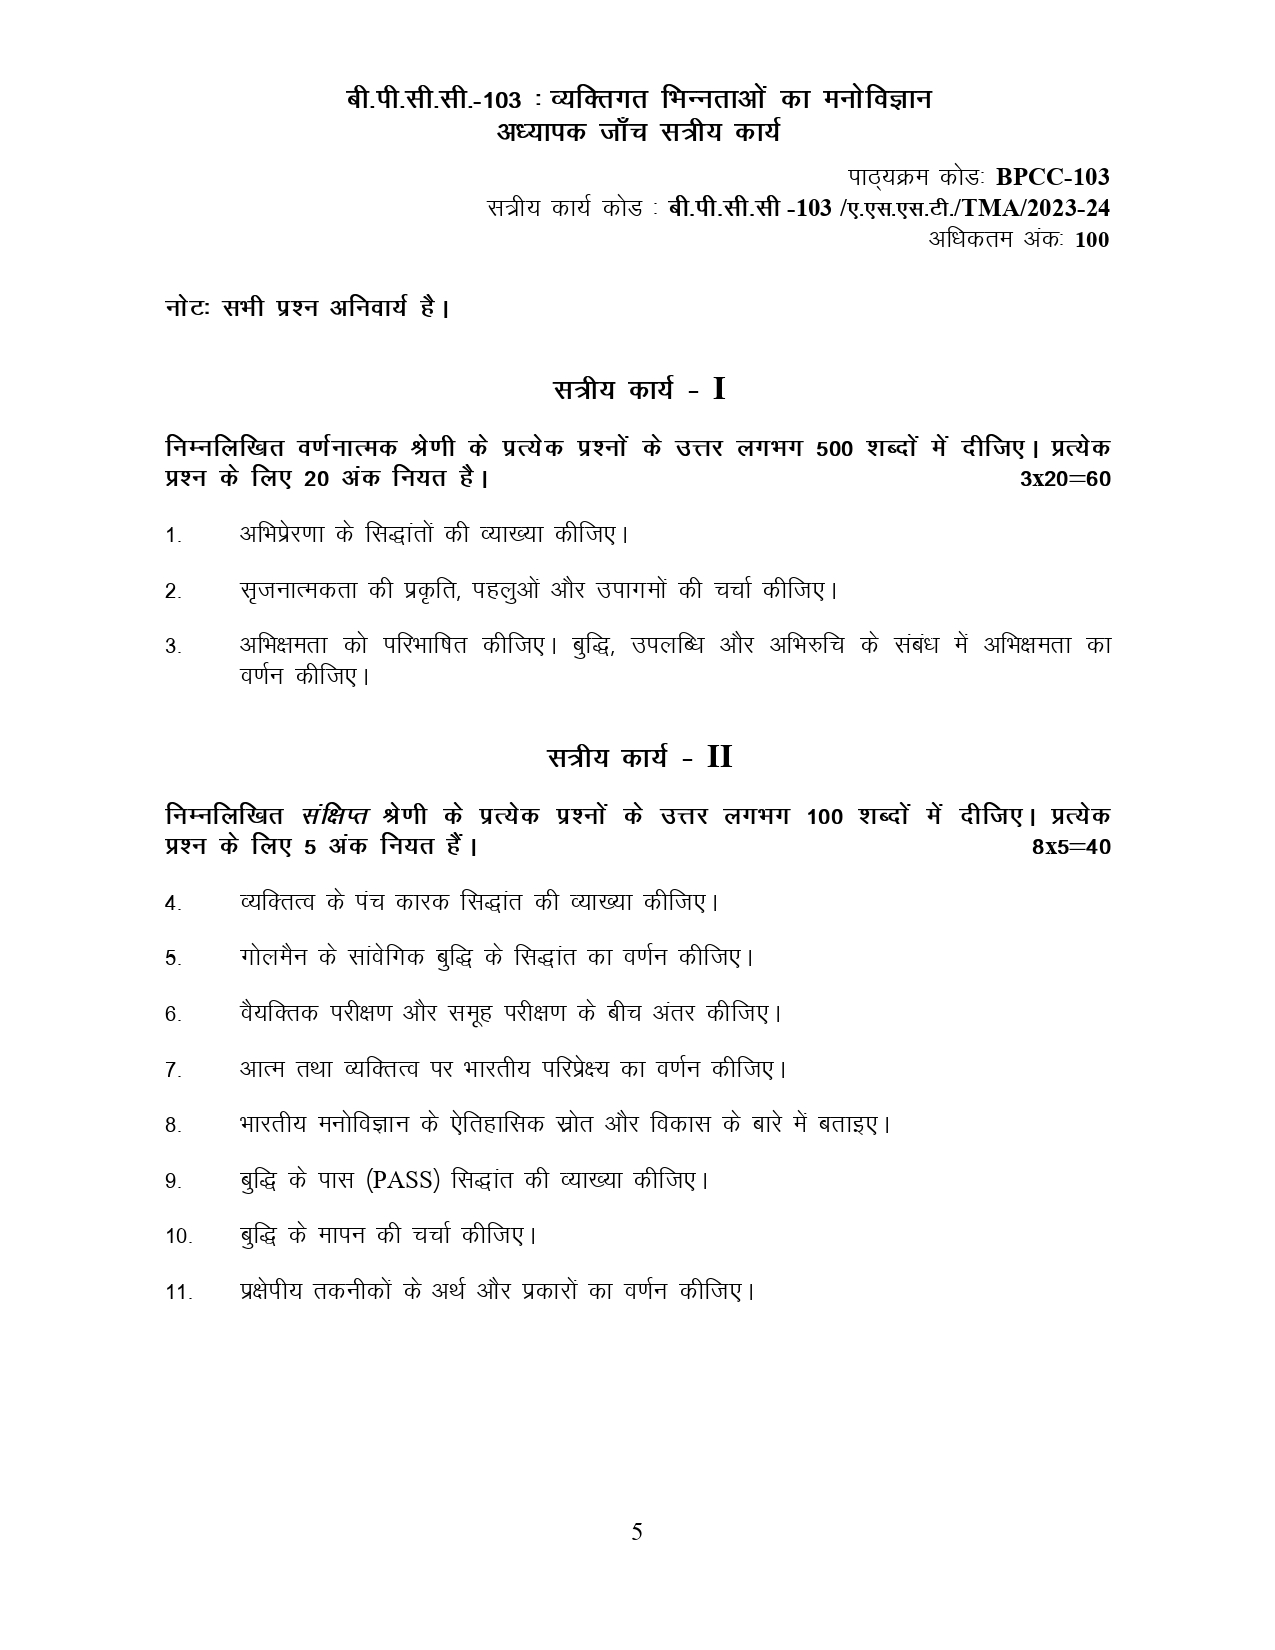 IGNOU BPCC 103 HINDI SOLVED ASSIGNMENT 2023-24